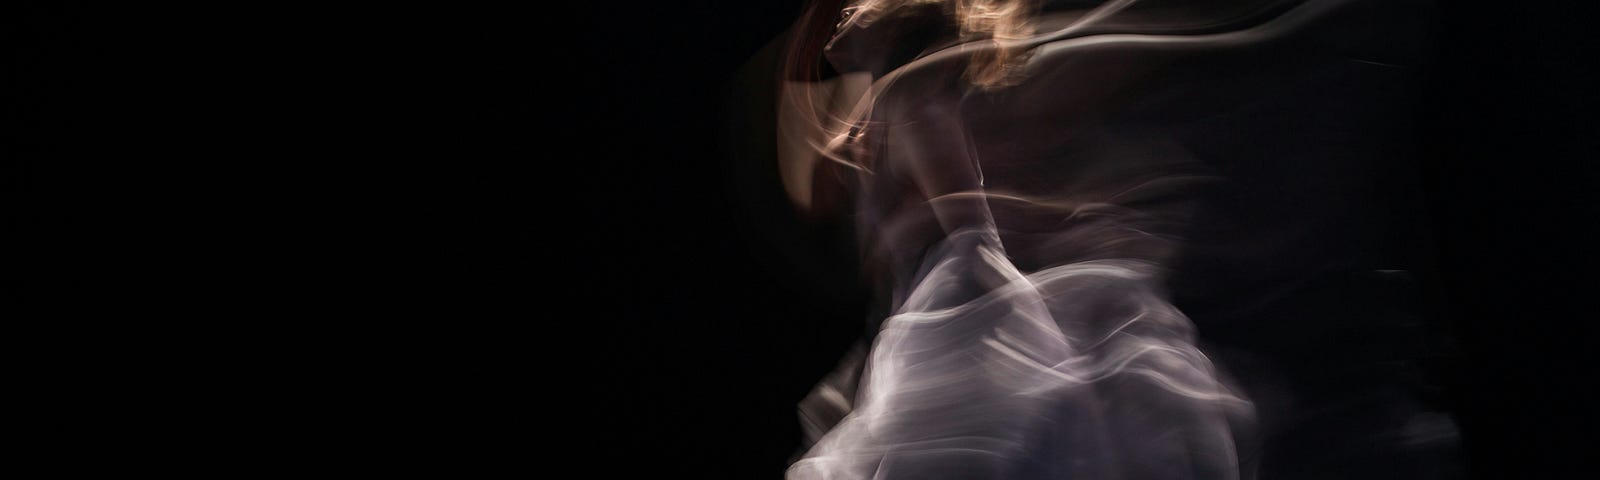 A blurry photograph of a woman dancing on a stage with a black background.